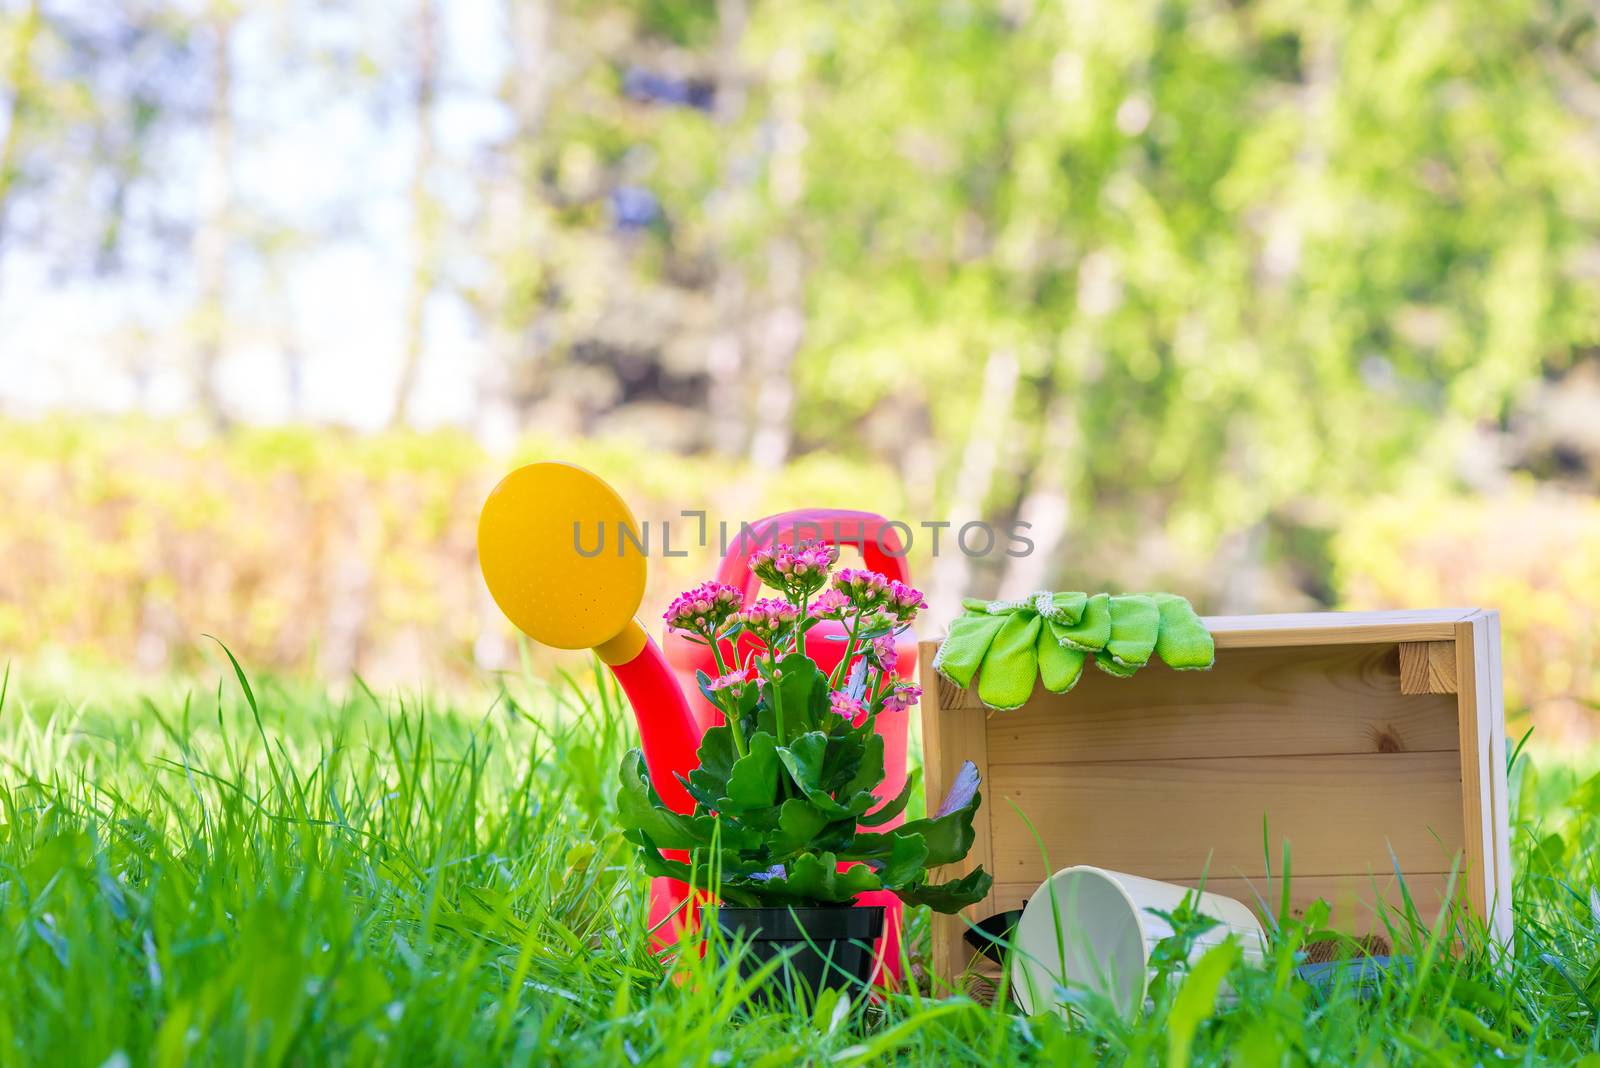 wooden box, watering can and flower in a pot - objects for sprin by kosmsos111